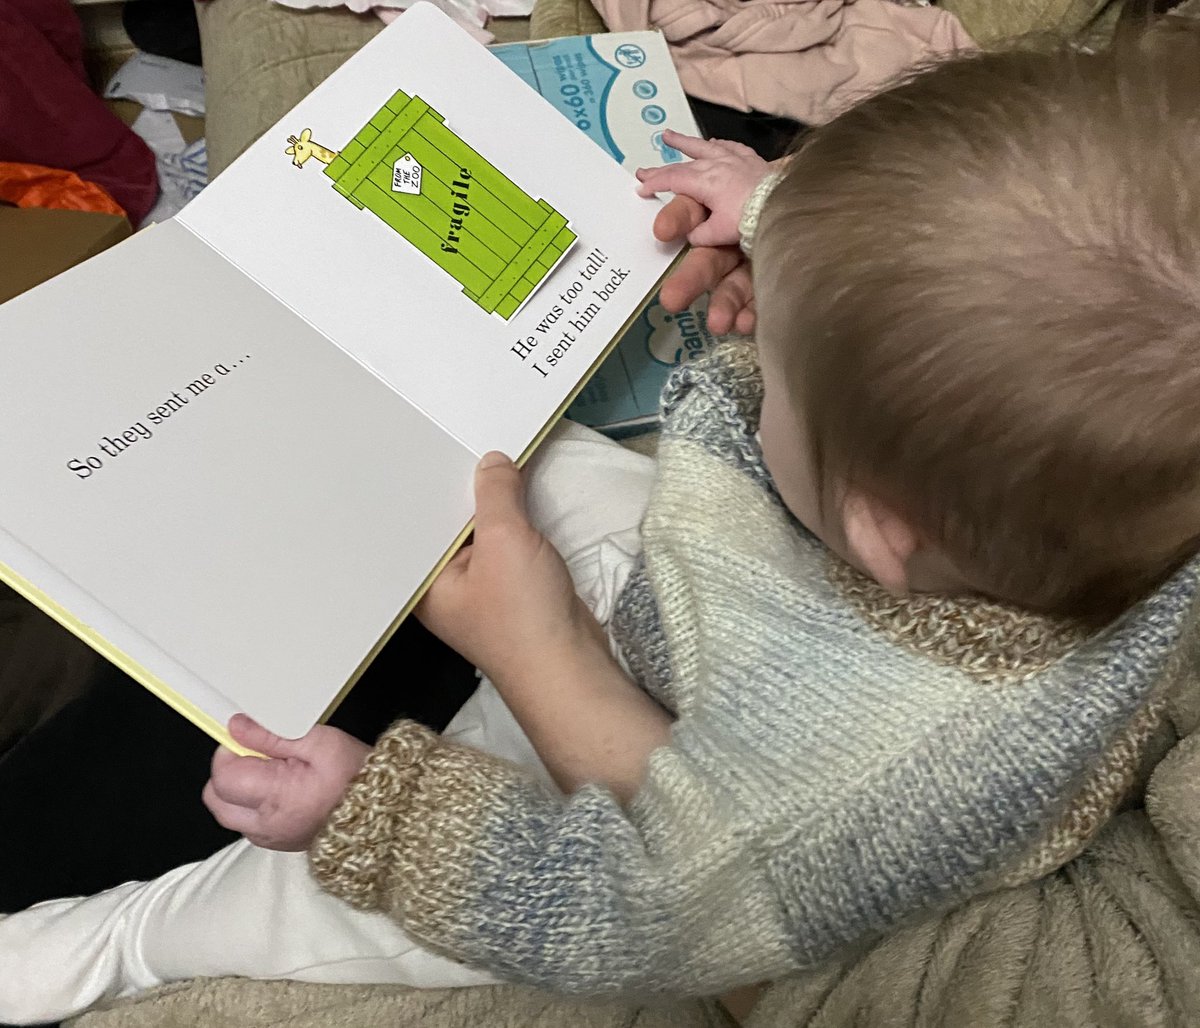 After dinner last night we got some reading done. #babybooks #dearzoo #babybookworm